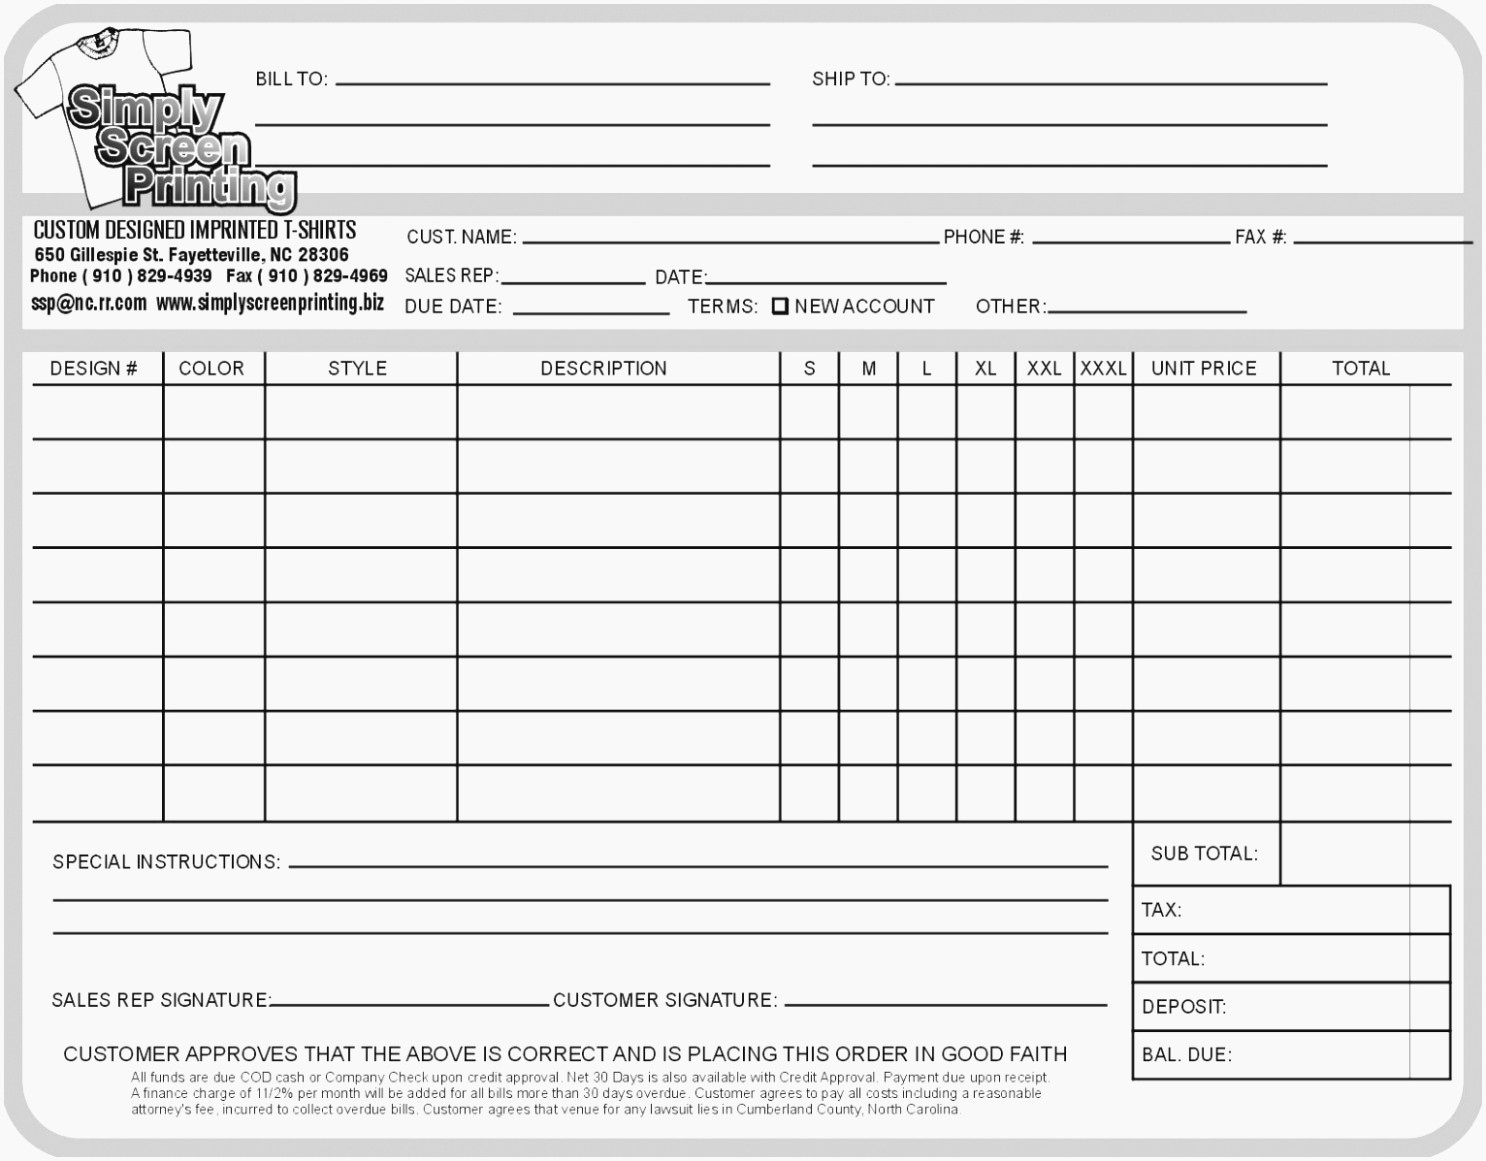 Screen Printing Invoice Template Lovely Ten Facts that Nobody told